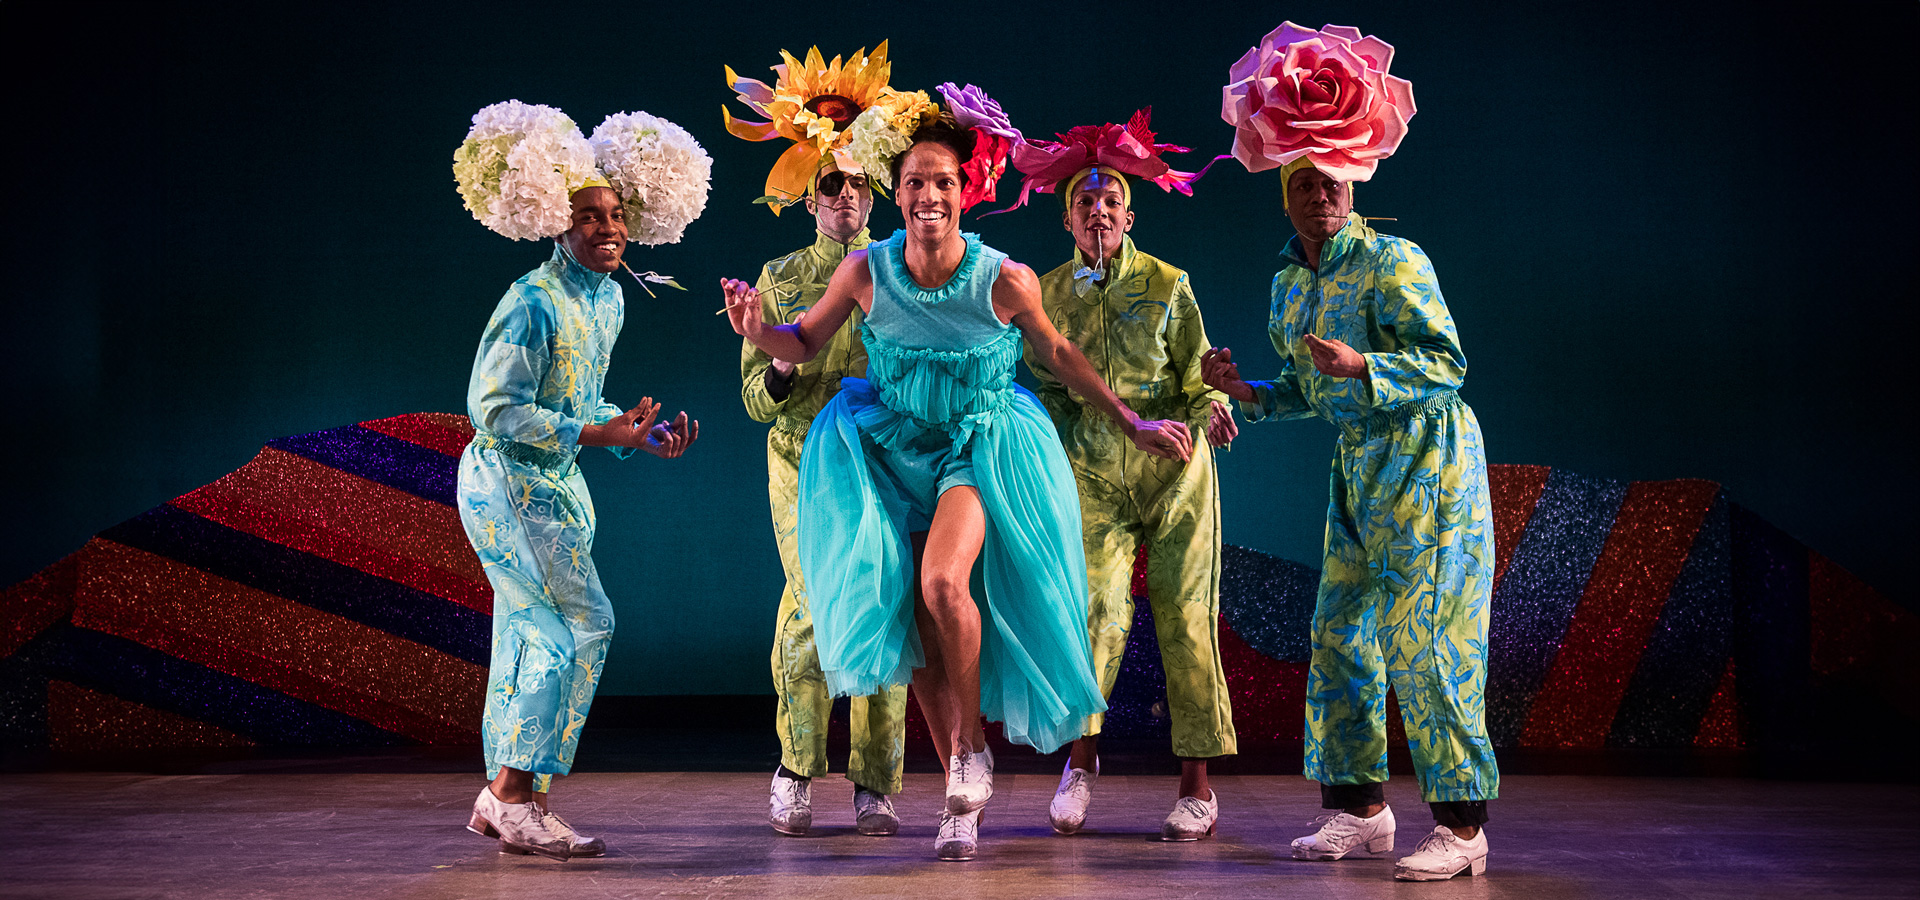 Performers in the Dorrance Dance group wear large flower headpieces and configure together in a tap-dance routine on stage.